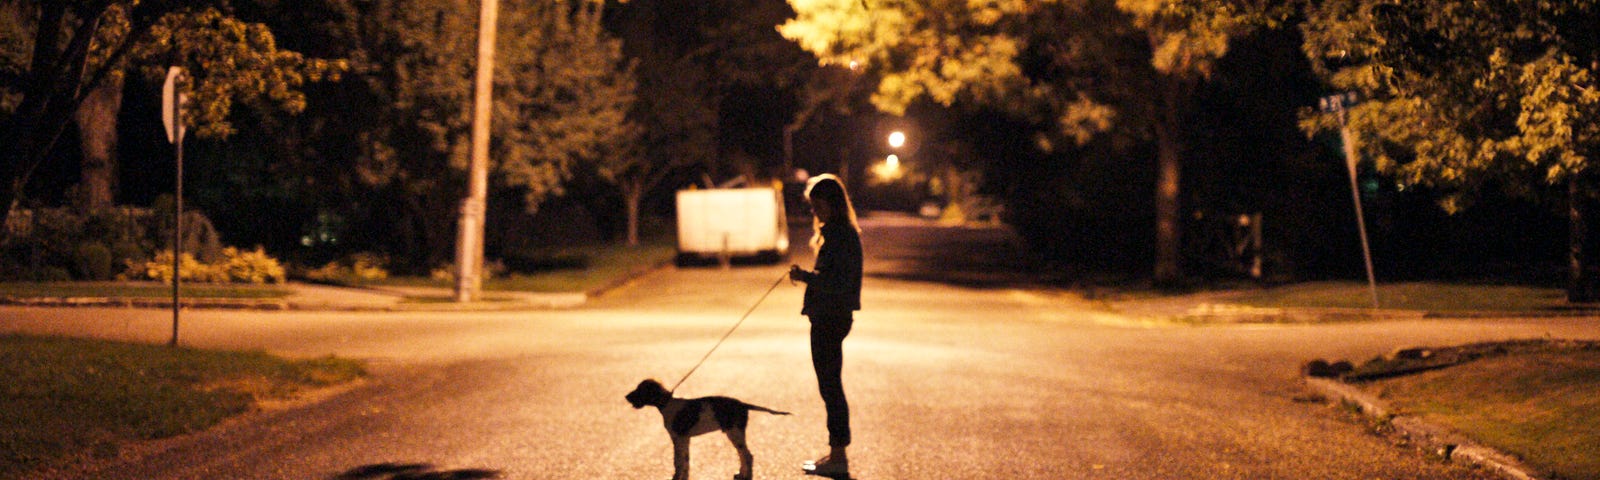 An ominous looking photo of a woman with her dog in an empty street at night.